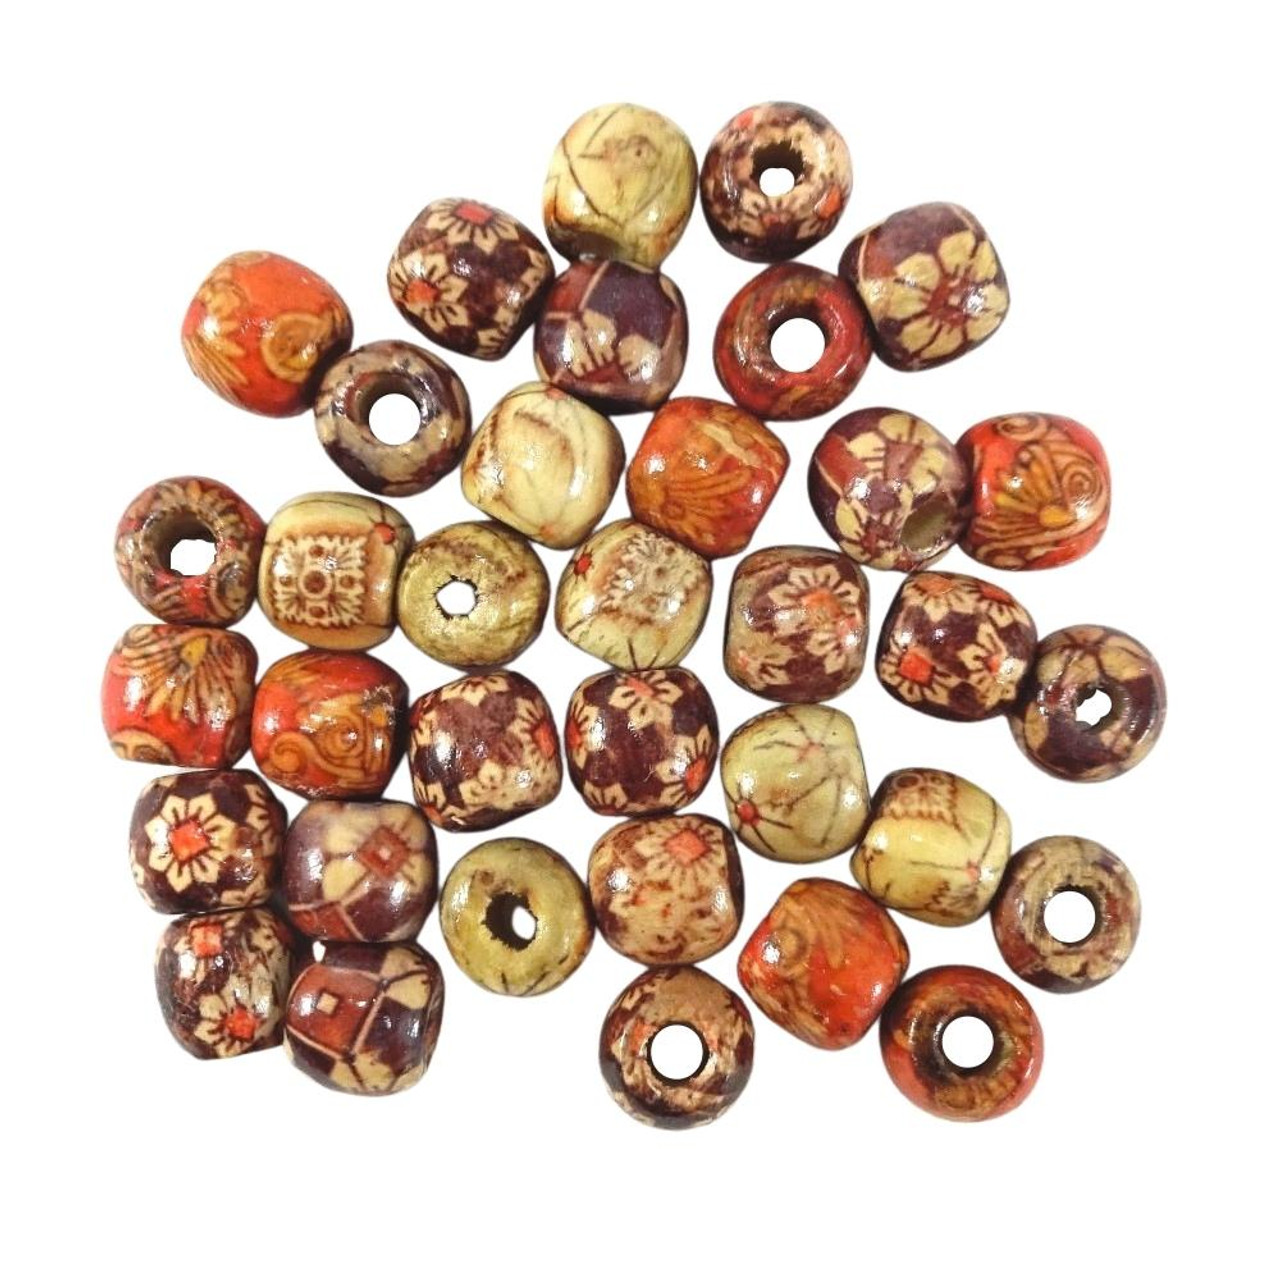 12mm Wooden Patterned Hair Beads, Brown/Red/Beige at I Kick Shins